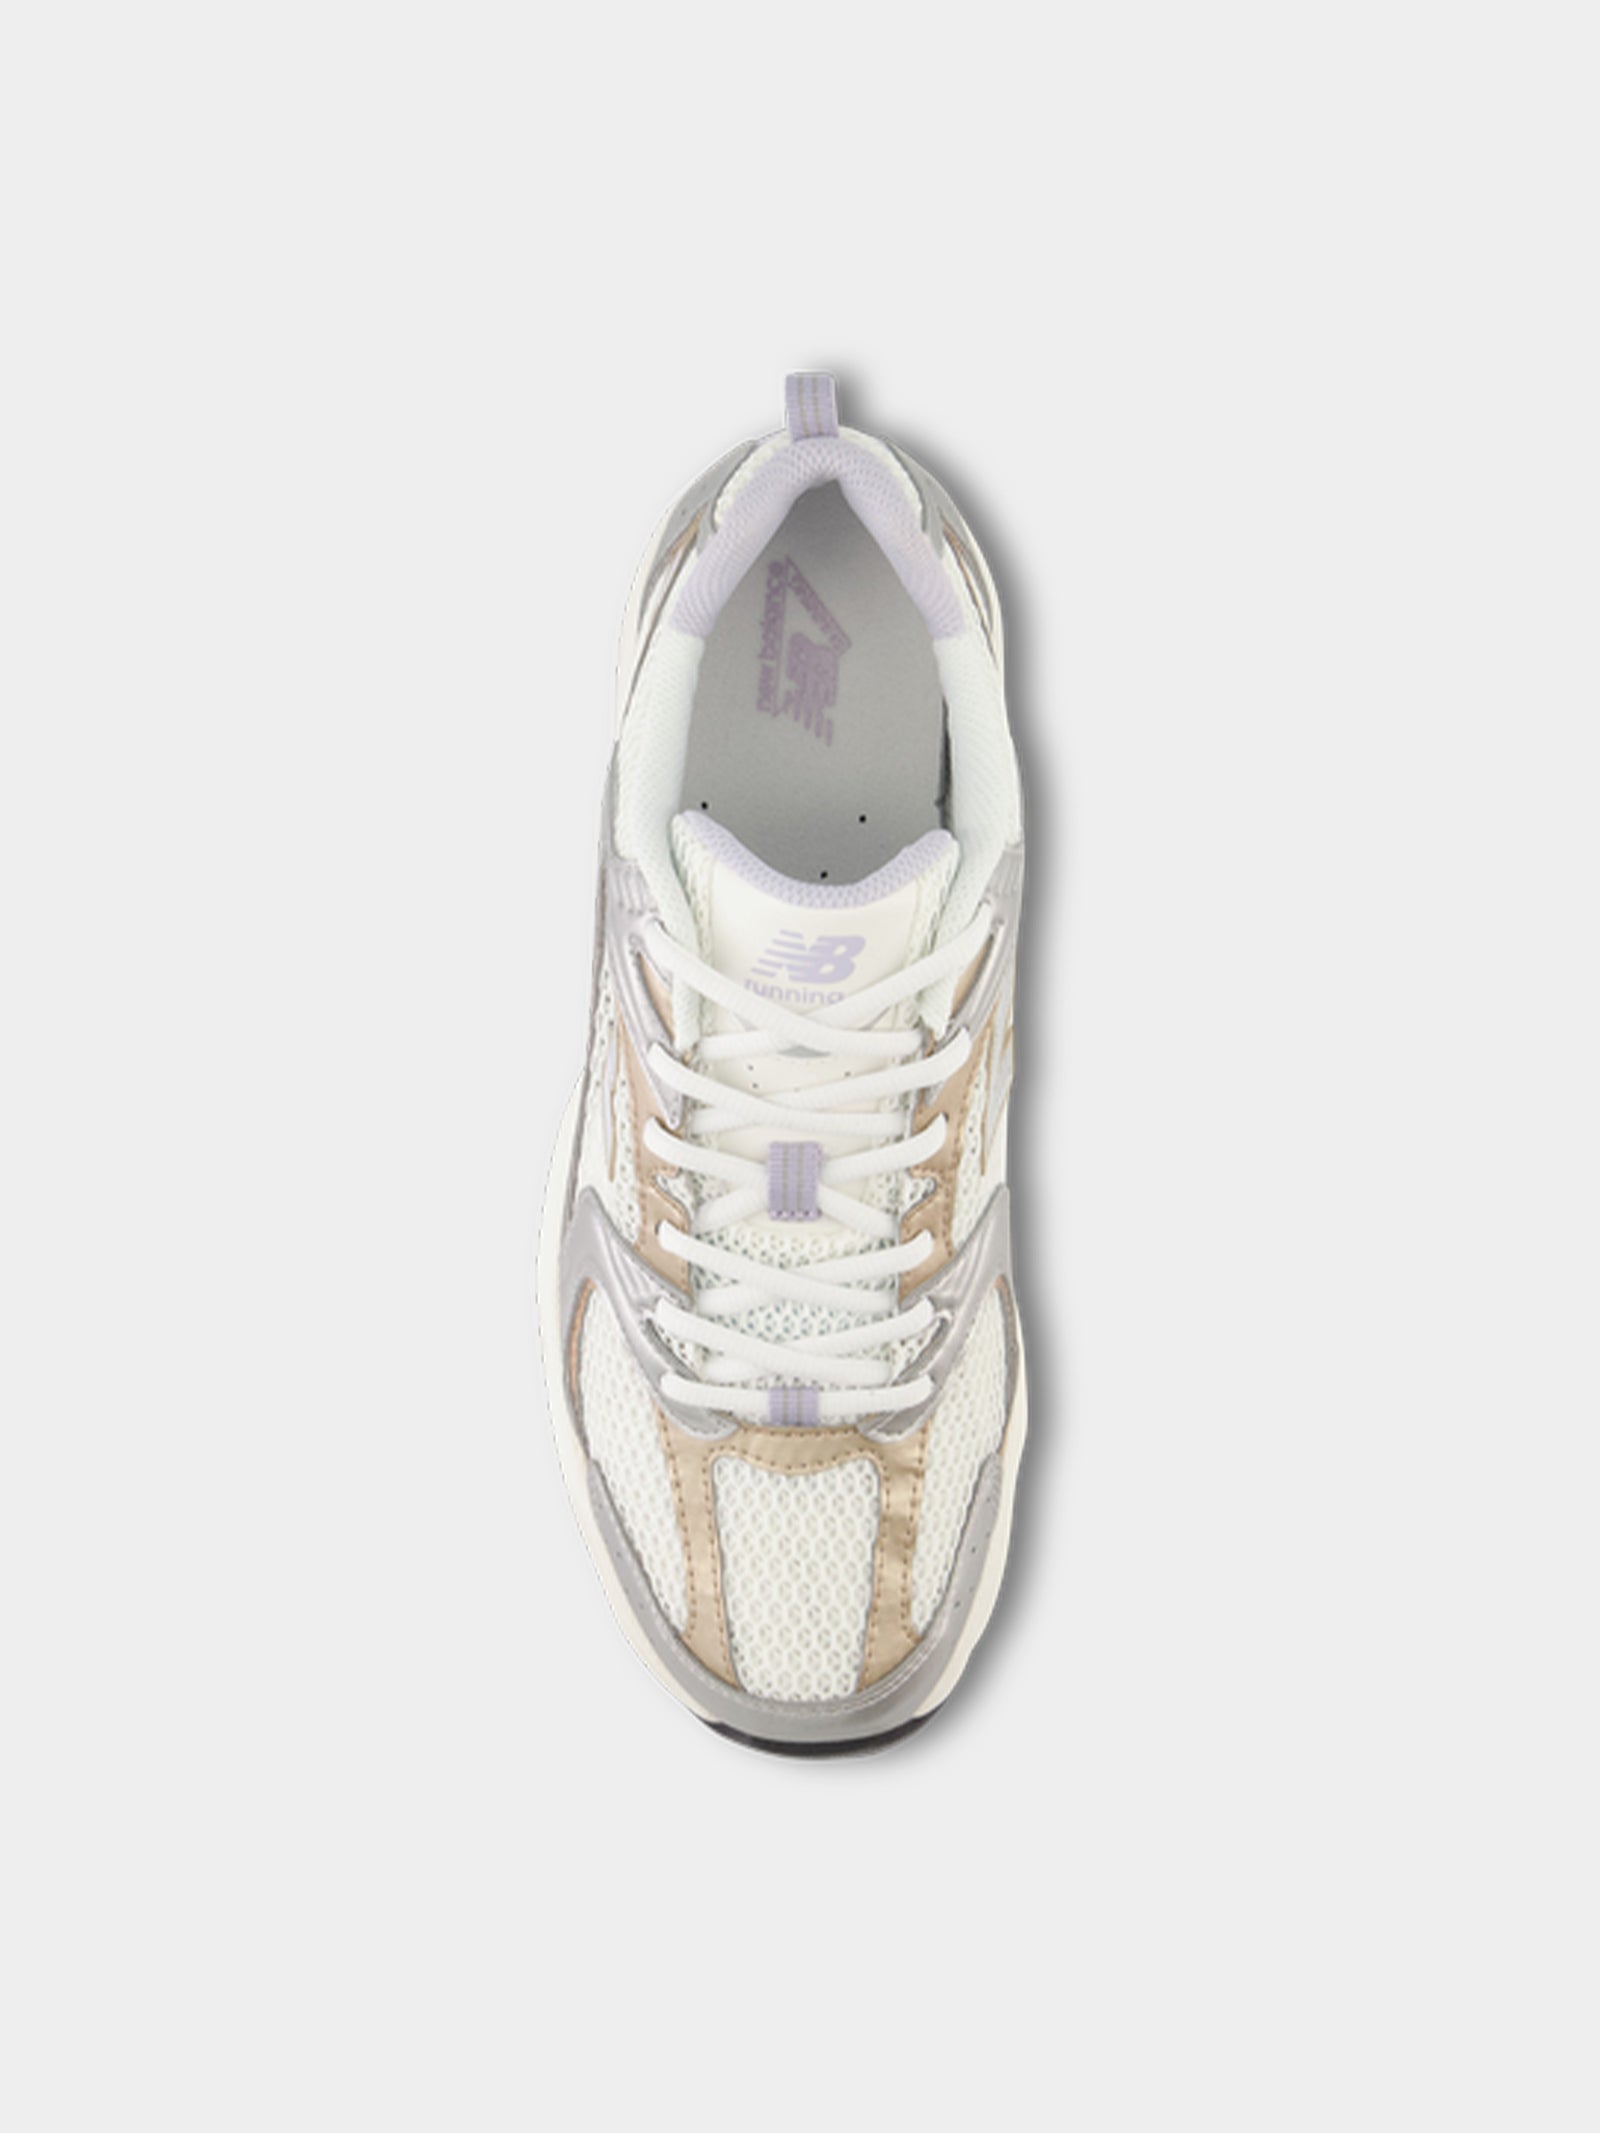 Unisex 530 Sneakers in White & Gold